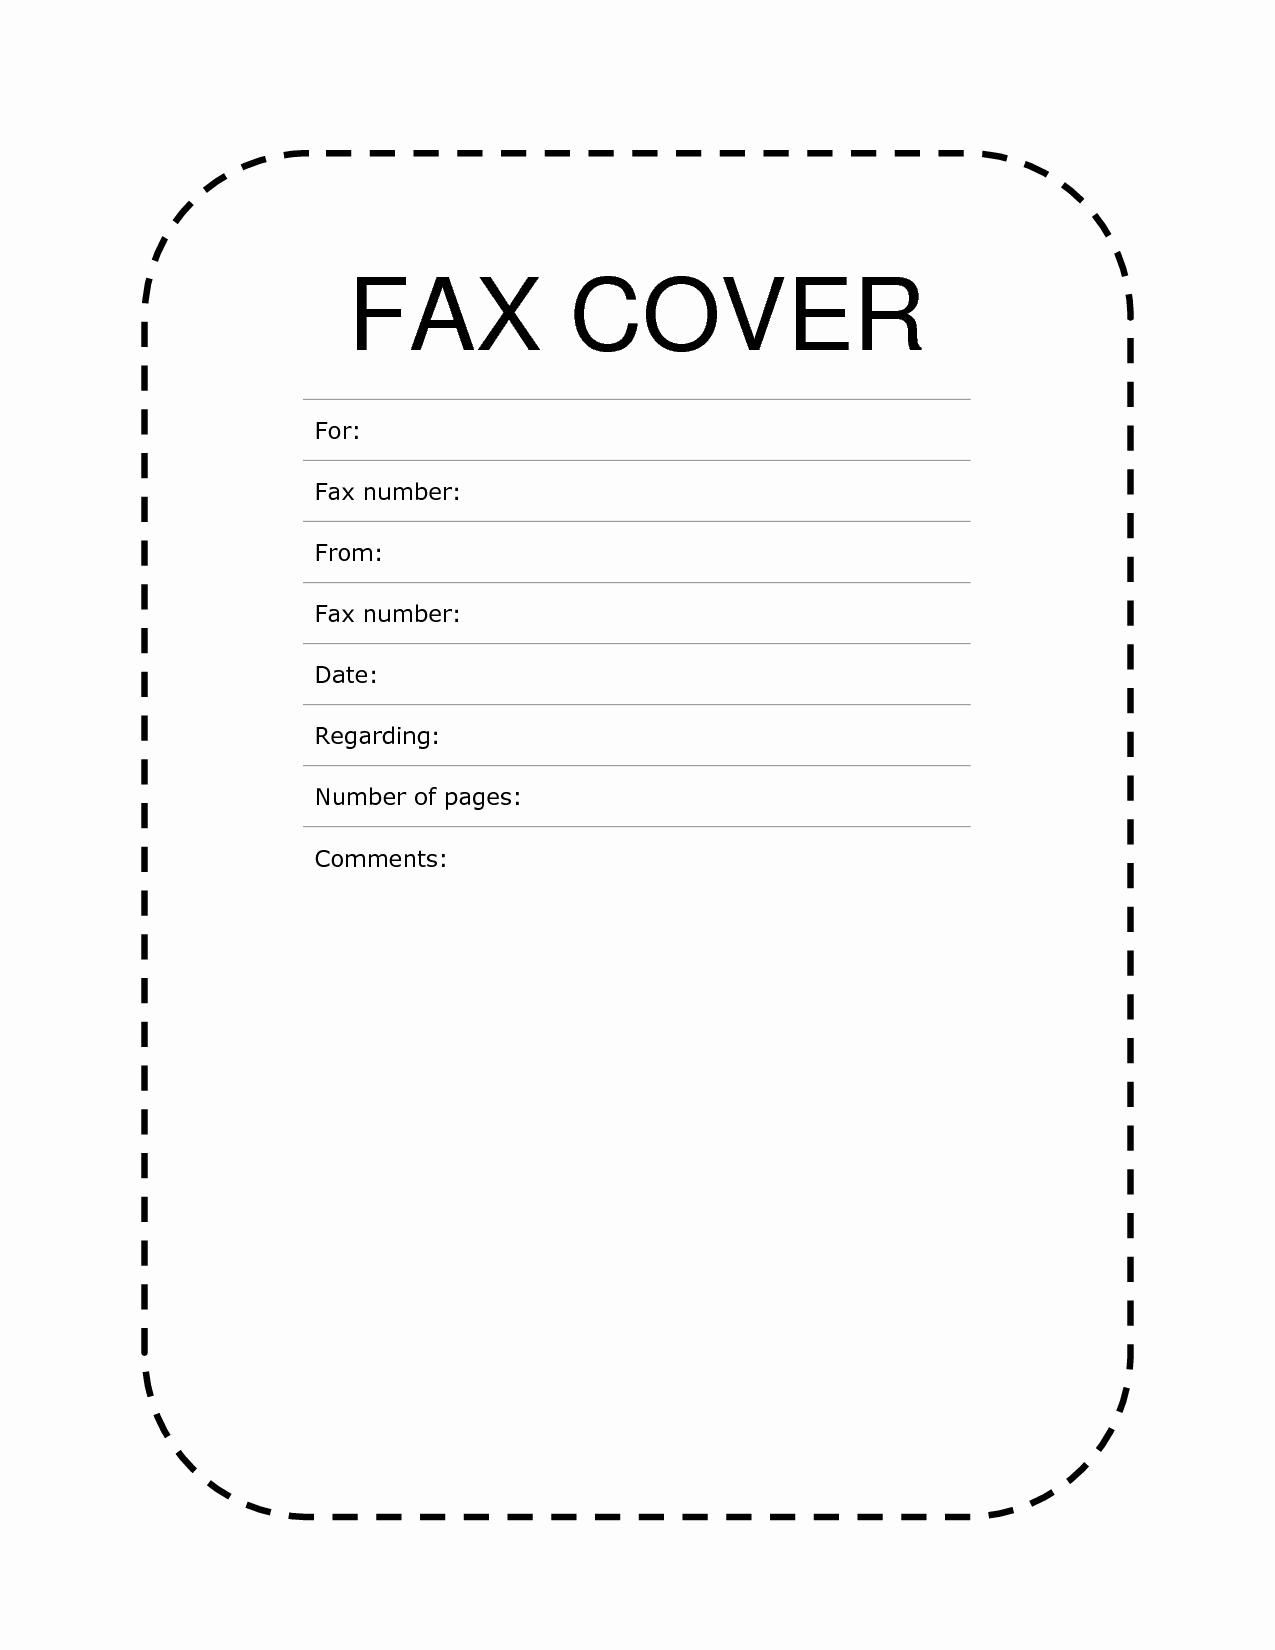 Free Printable Cover Letter Of Free Printable Blank Fax Cover Sheet - Free Printable Fax Cover Sheet